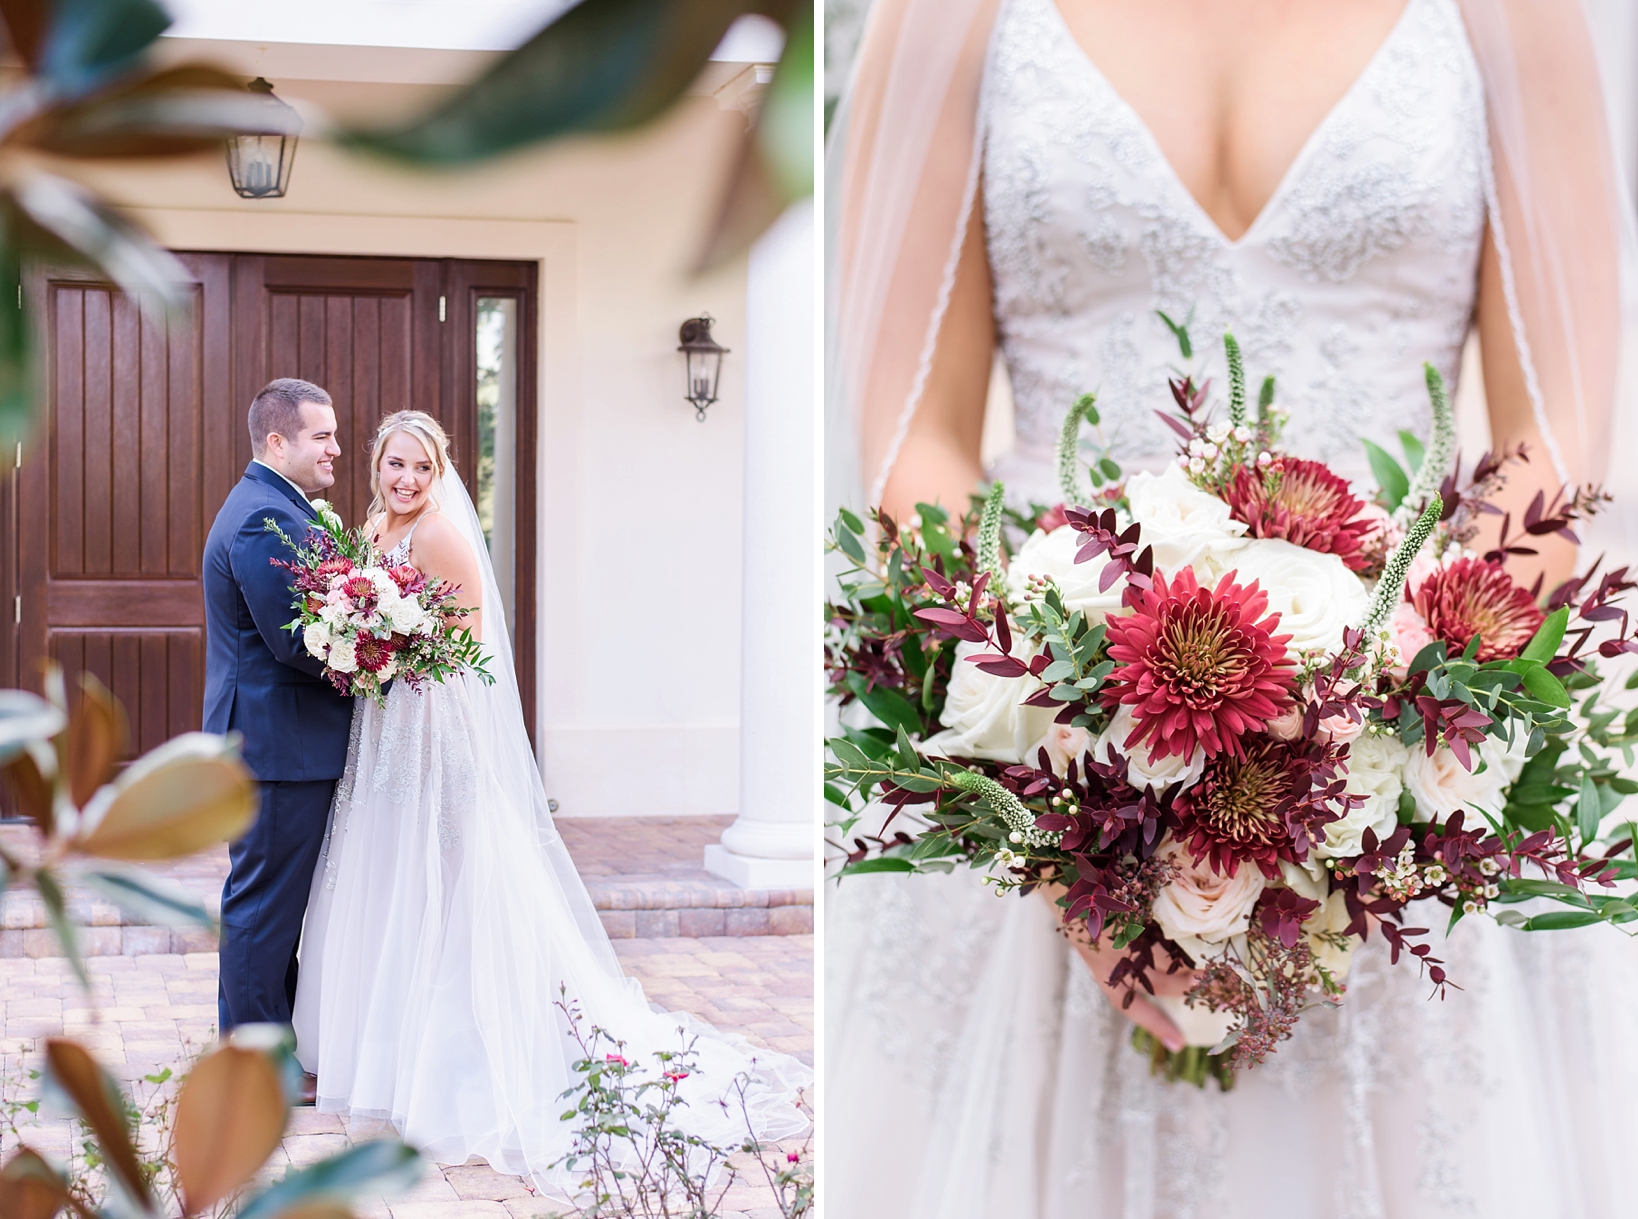 Bride and Groom smiling and a detailed picture of the Bride's floral bouquet and Hayley Paige Dress